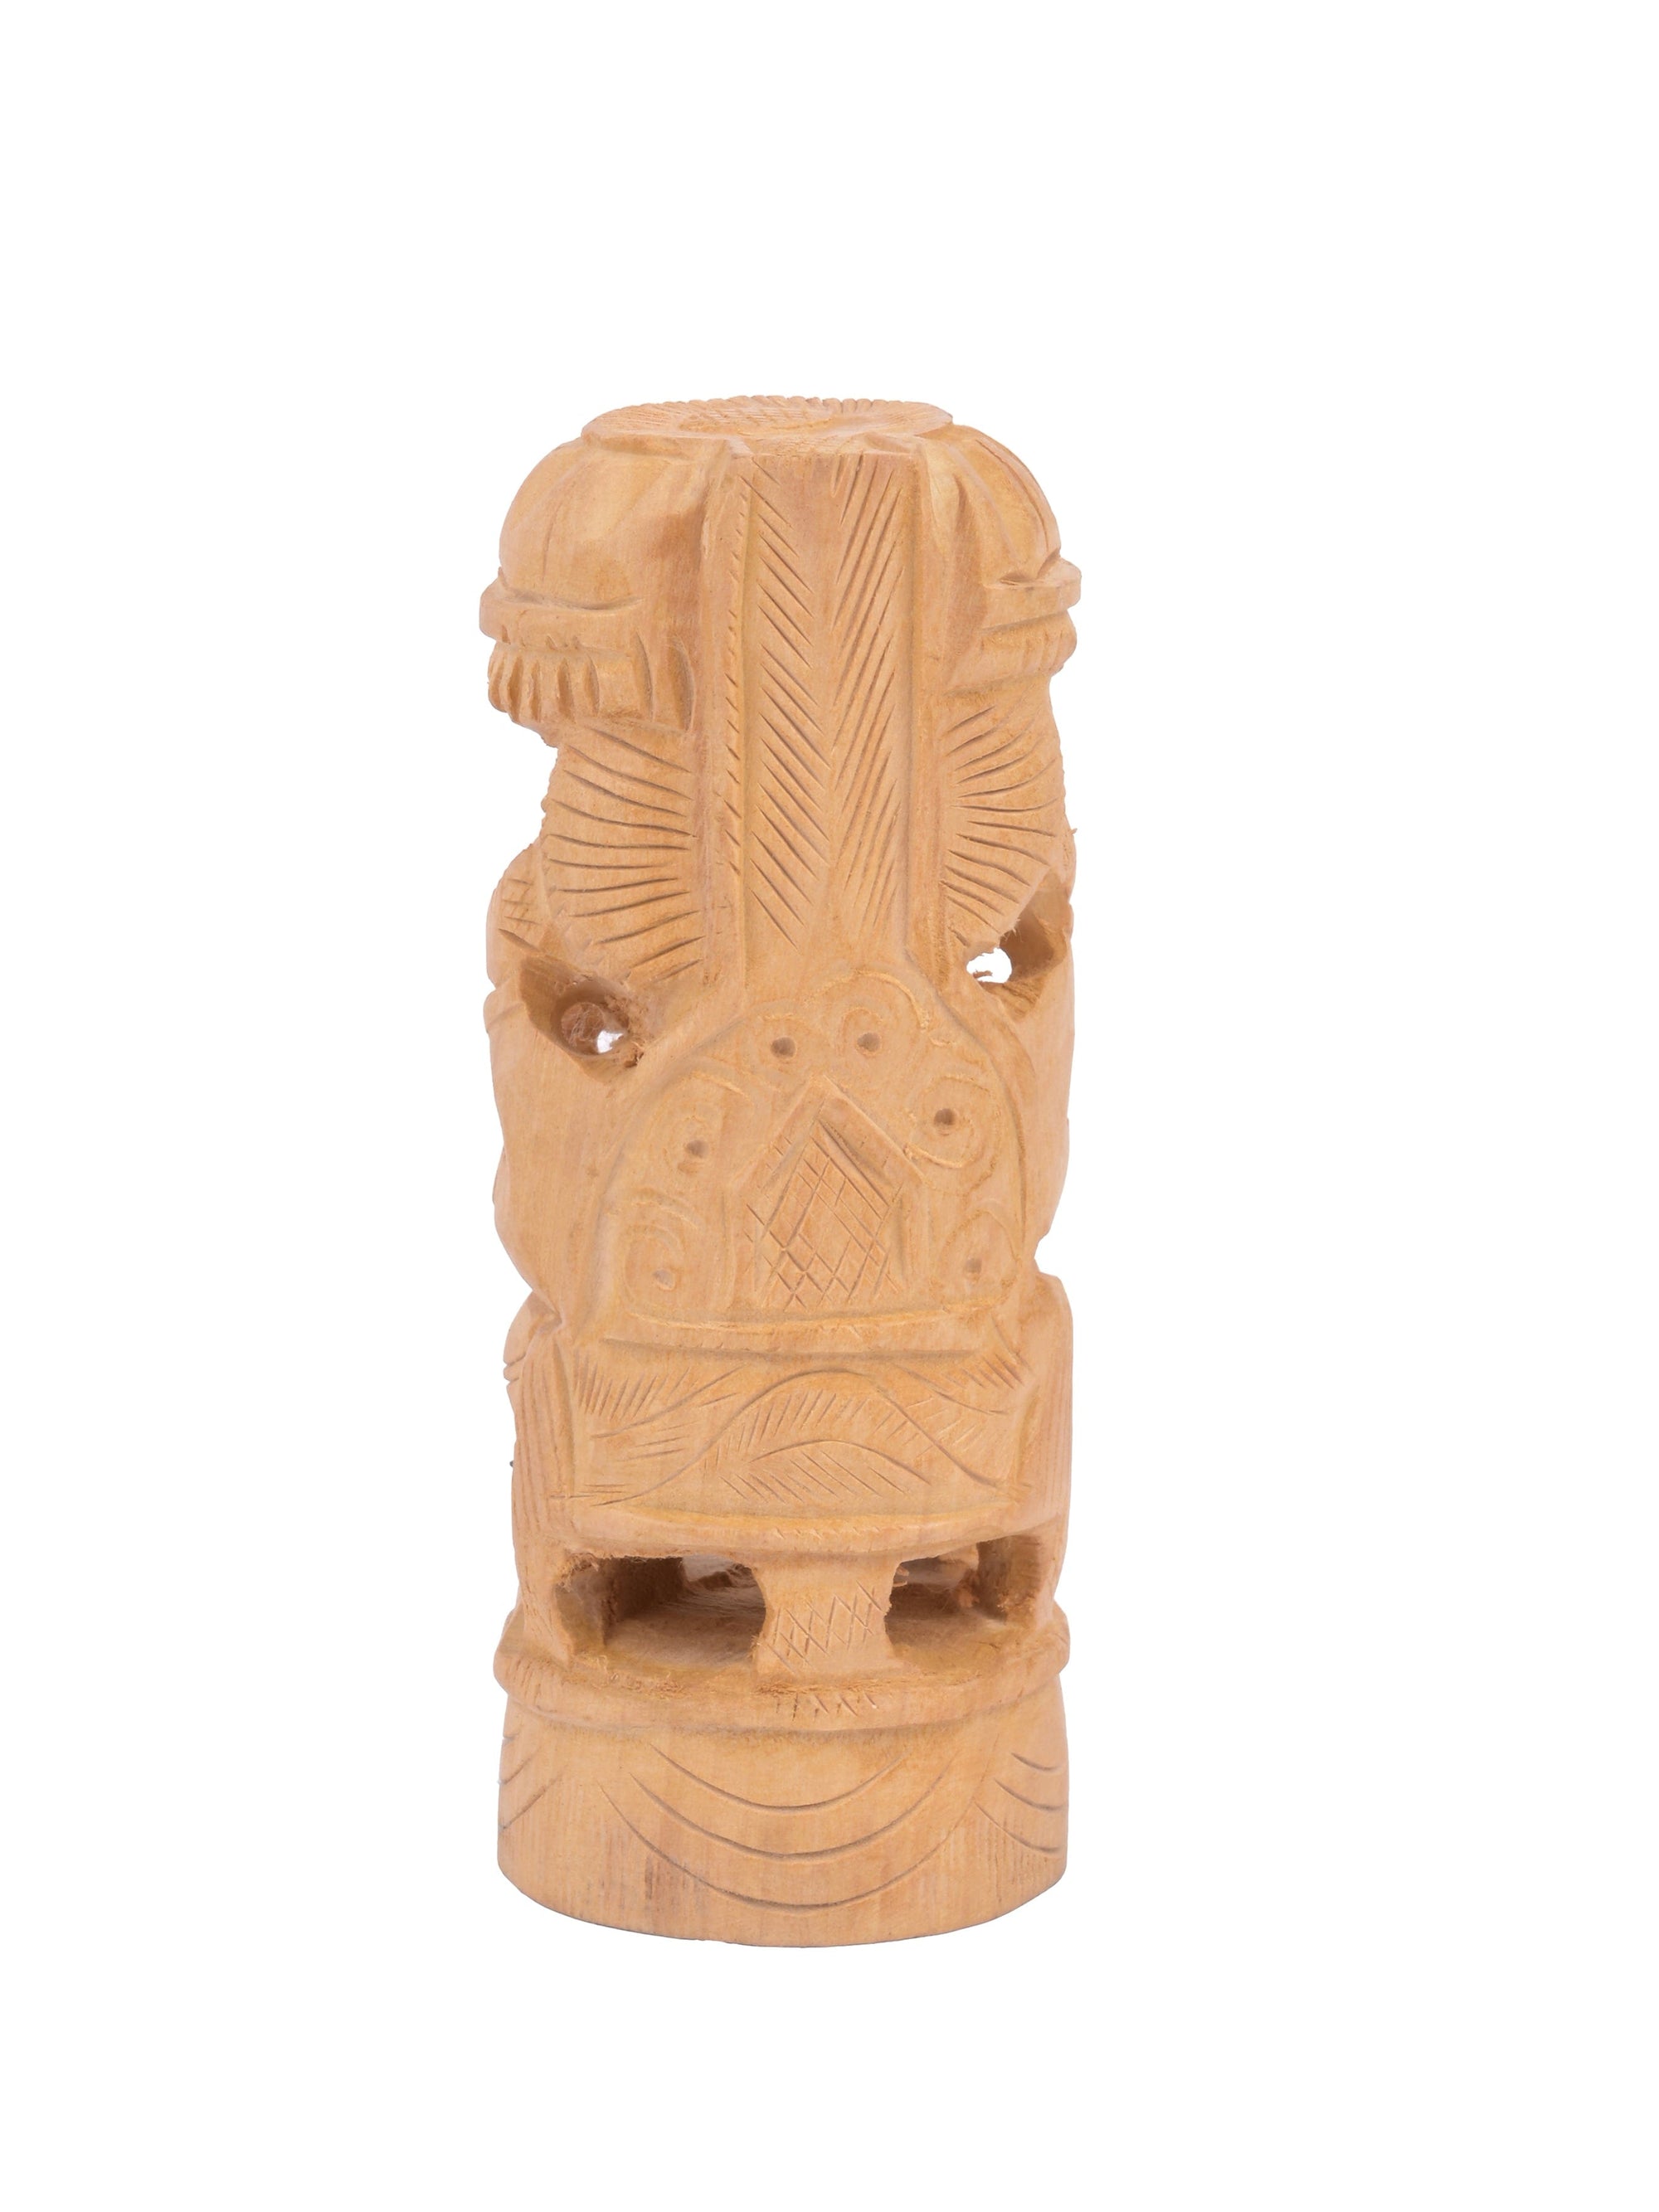 Kadam wood carved round shaped Lord Ganesh with Chatri / Umbrella - 5 inches in height - The Heritage Artifacts